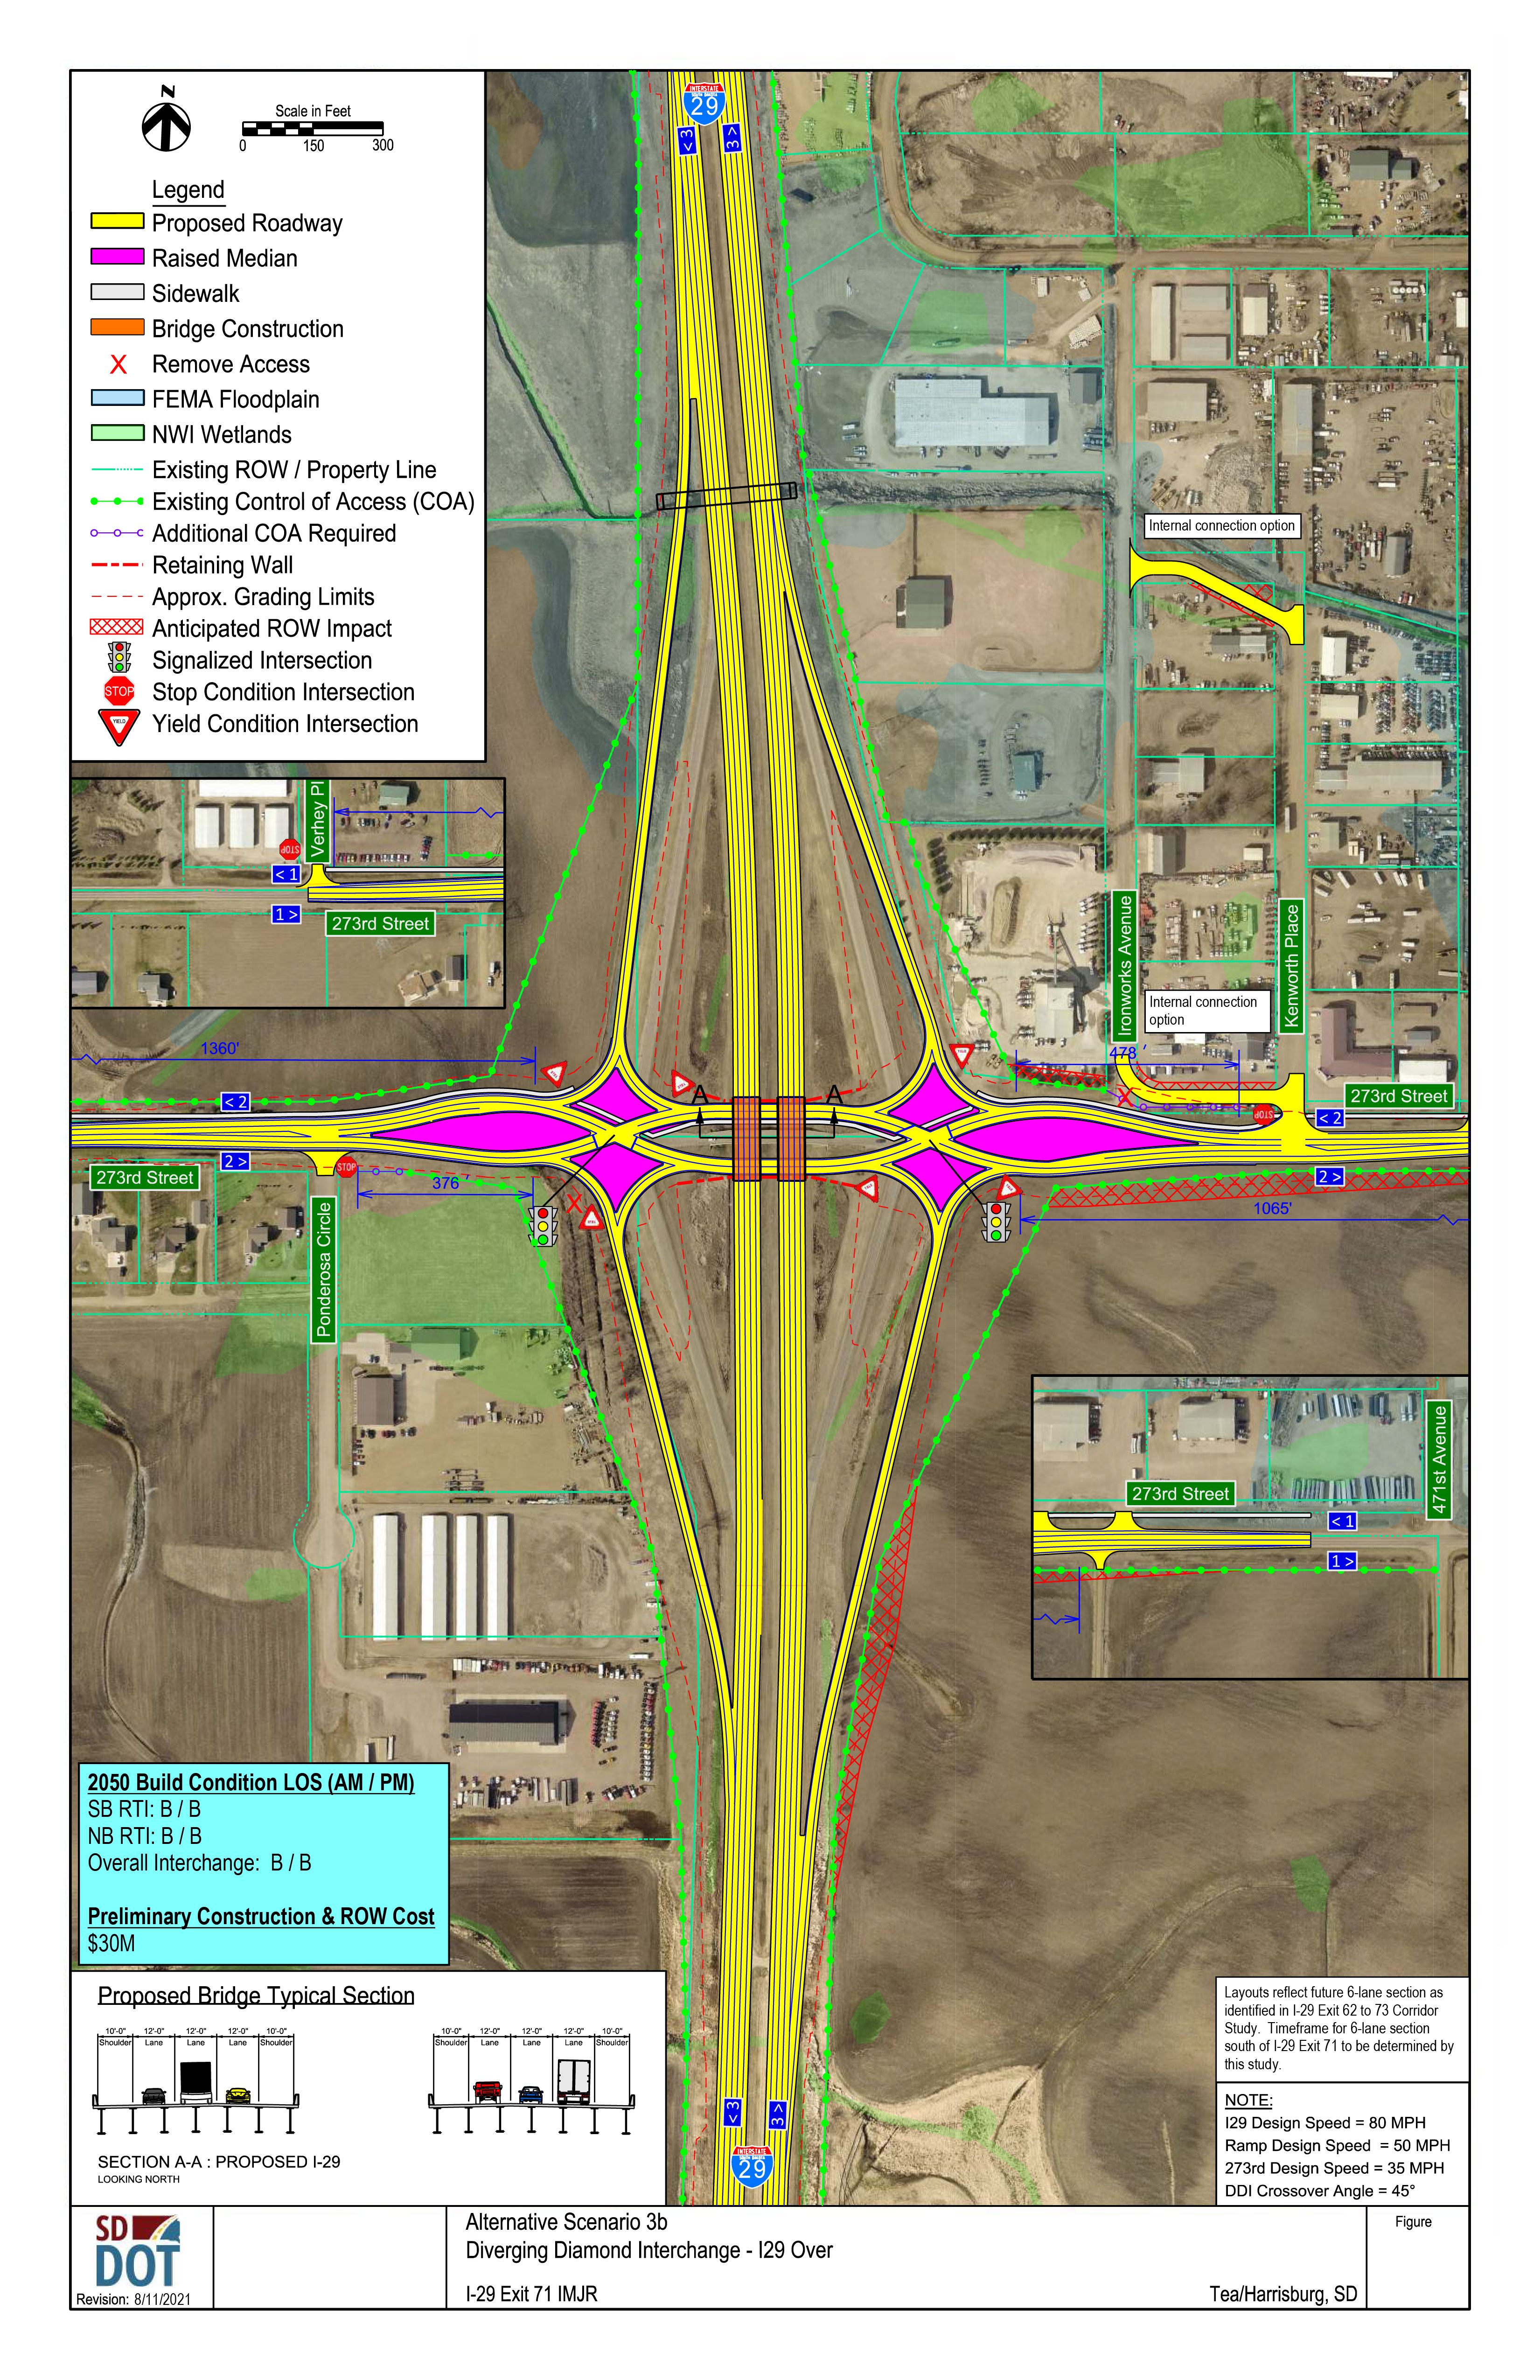 This image shows the conceptual layout of a Diverging Diamond Interchange, and what the road over it would look like. Details on the diagram include proposed roadway, raised median, sidewalk, bridge construction, access control, FEMA floodplain, NWI wetlands, existing Right of Ways and property lines, existing control of access points, additional control of access points needed, retaining walls, grading limits, anticipated right of way impacts, signalized intersections, stop condition intersections and yield condition intersections.